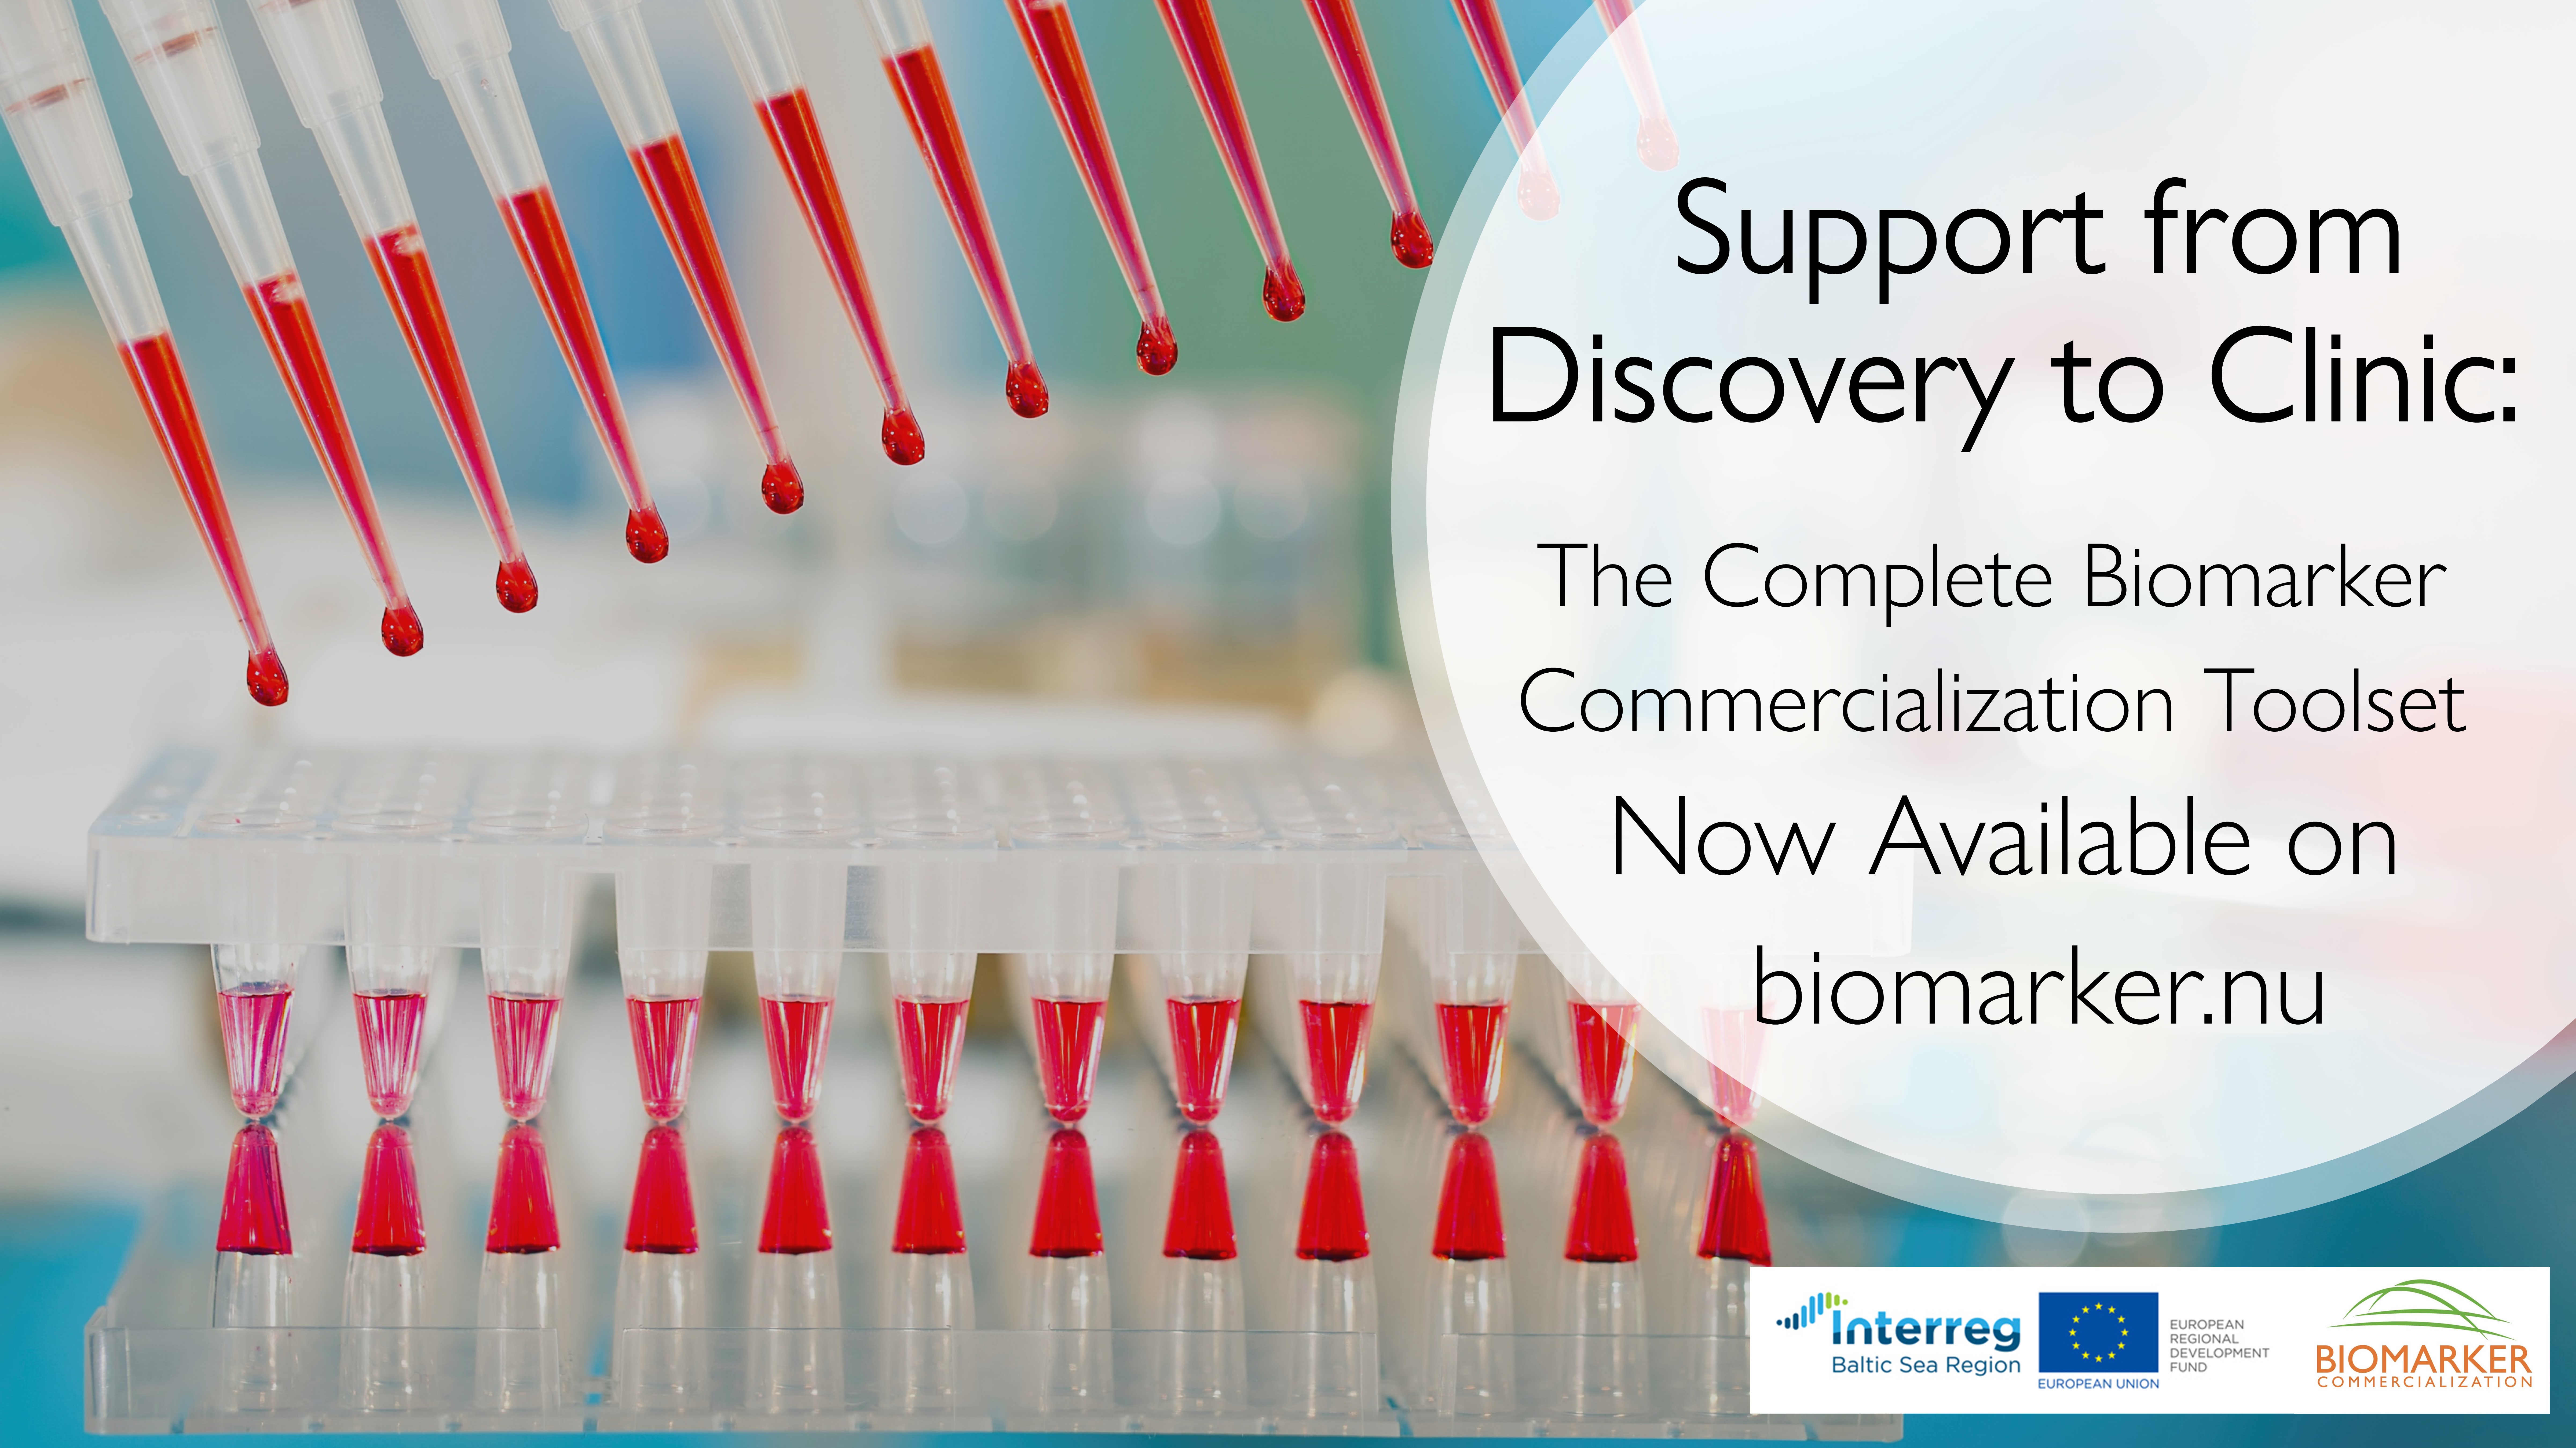 Enabling the market uptake of biomarkers used in diagnostics and treatment